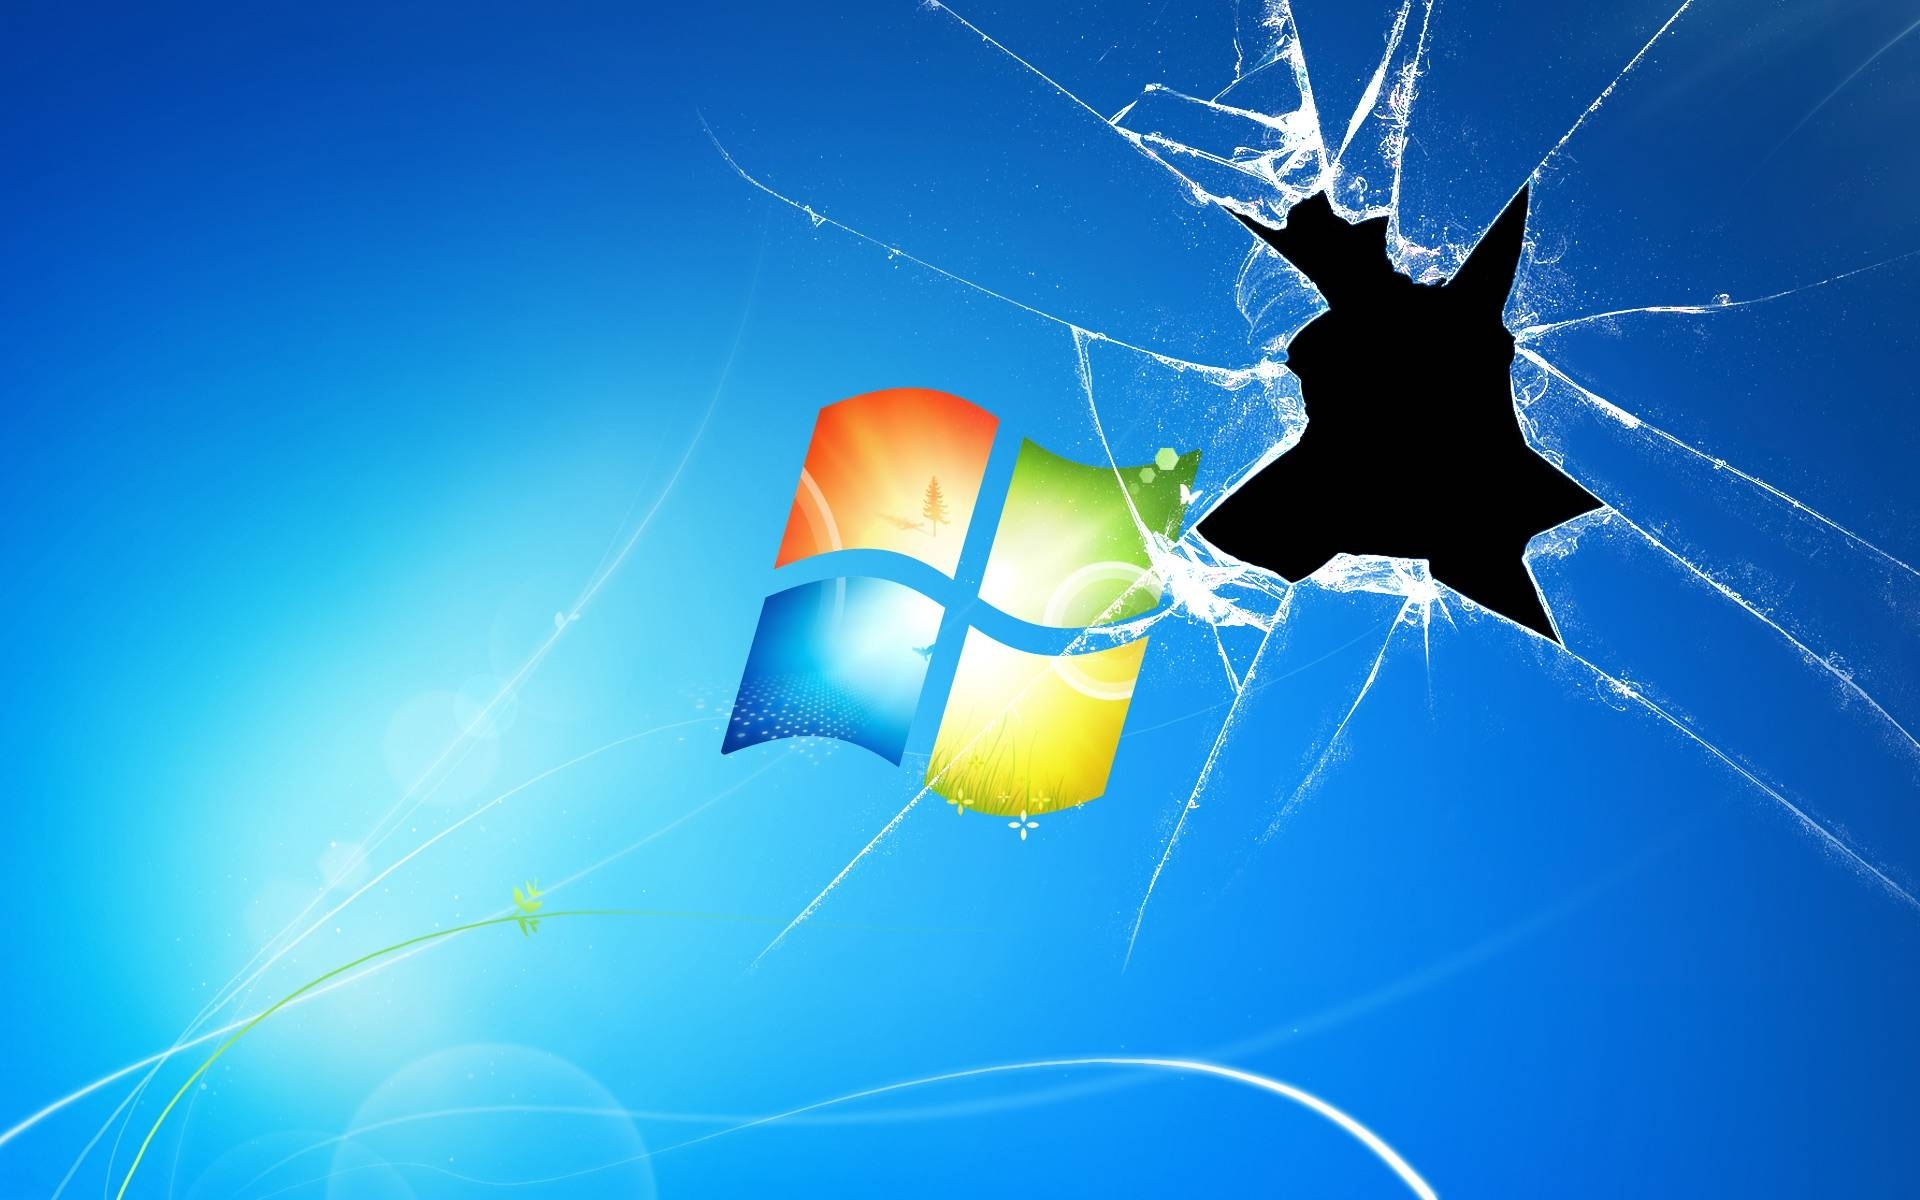 10 Latest Windows Cracked Screen Wallpaper FULL HD 1080p For PC Background